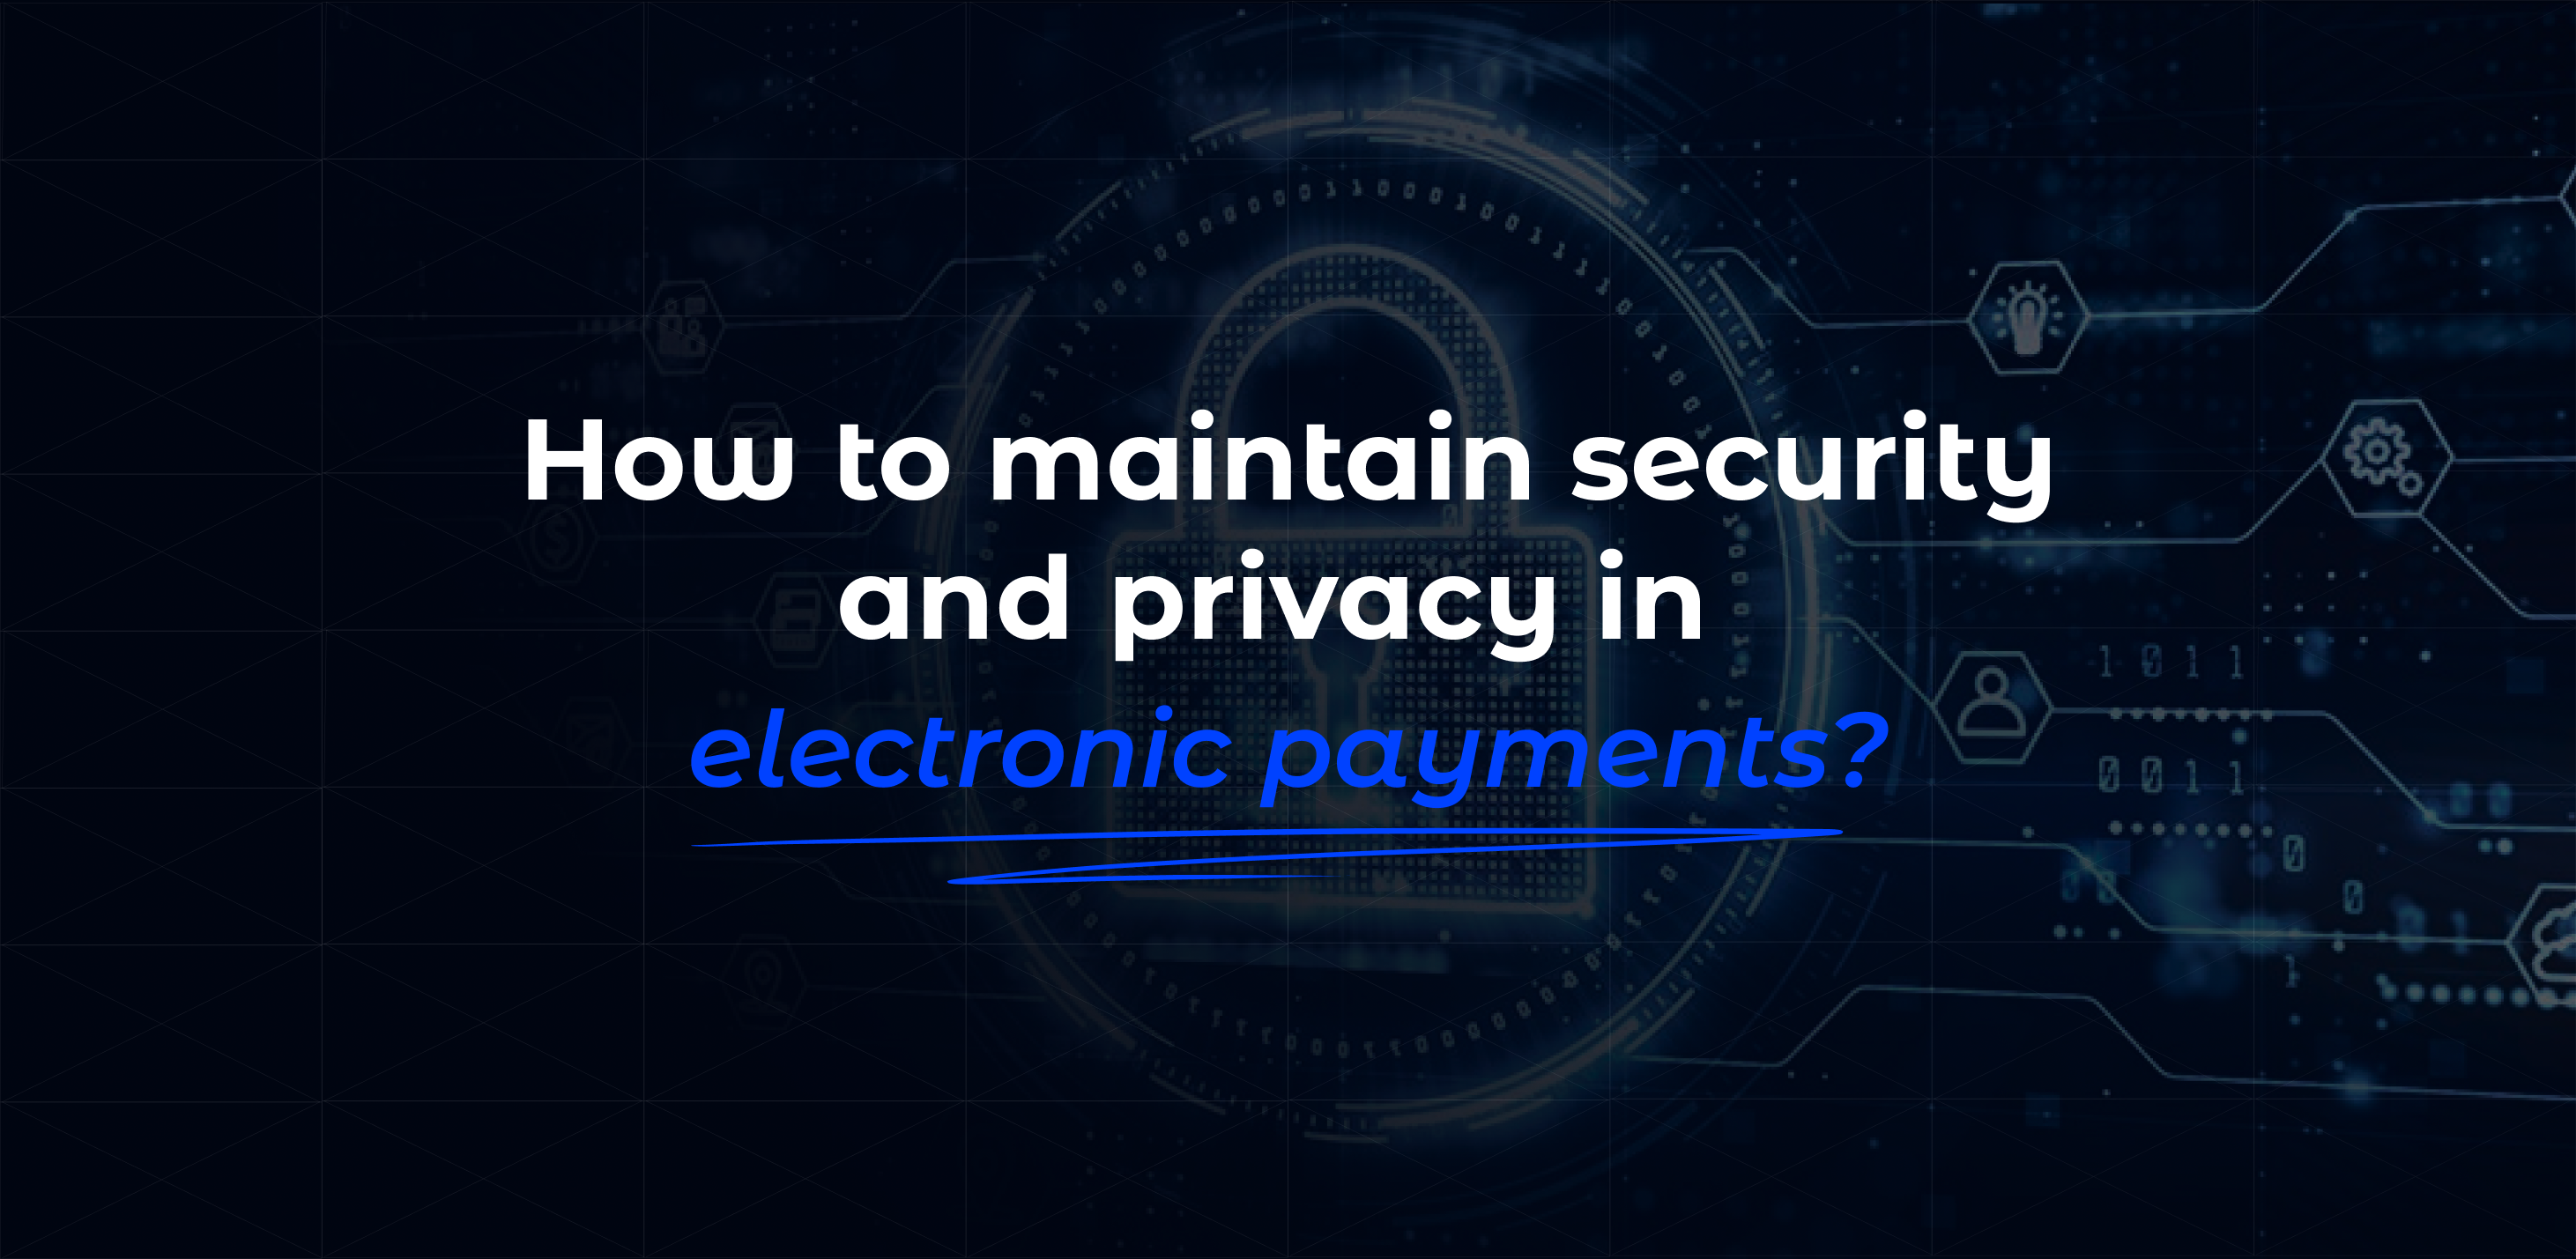 How to maintain security and privacy in electronic payments